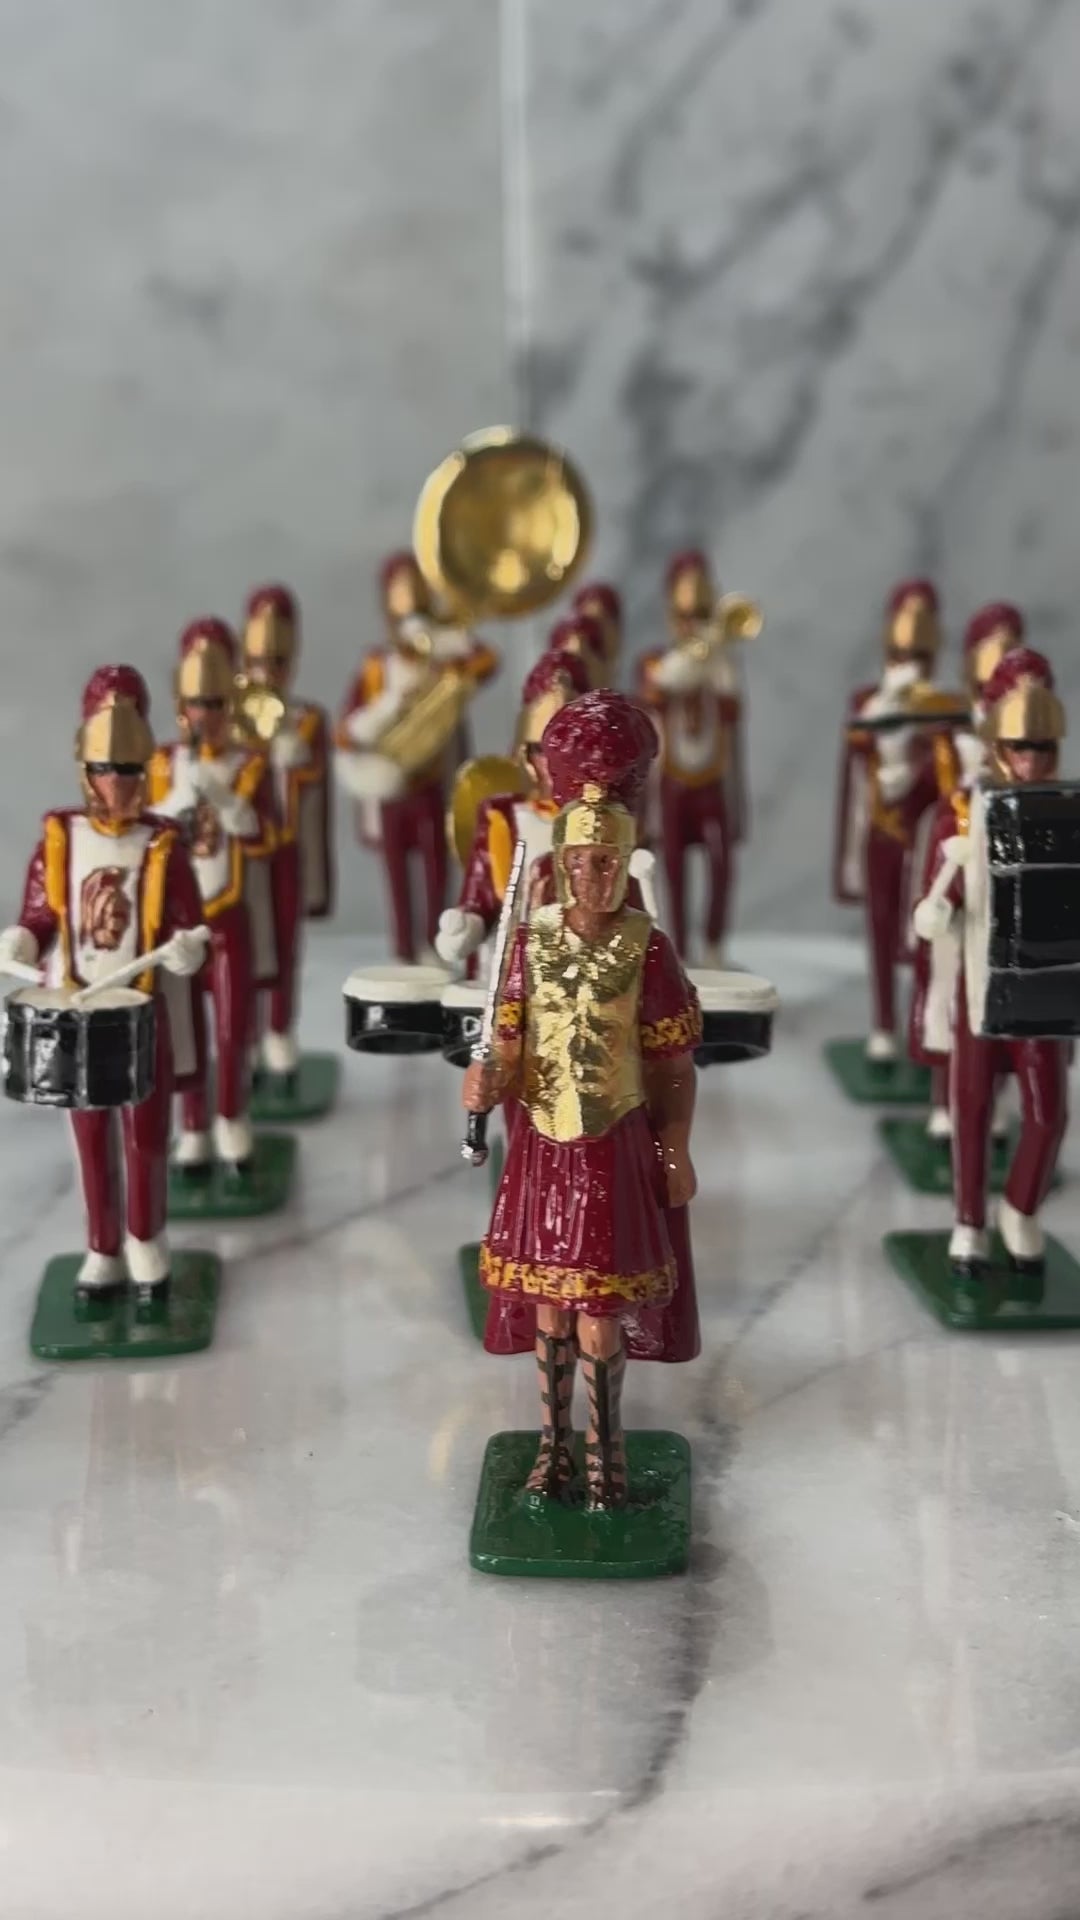 360 view of spirit of troy (USC) toy miniature marching band.